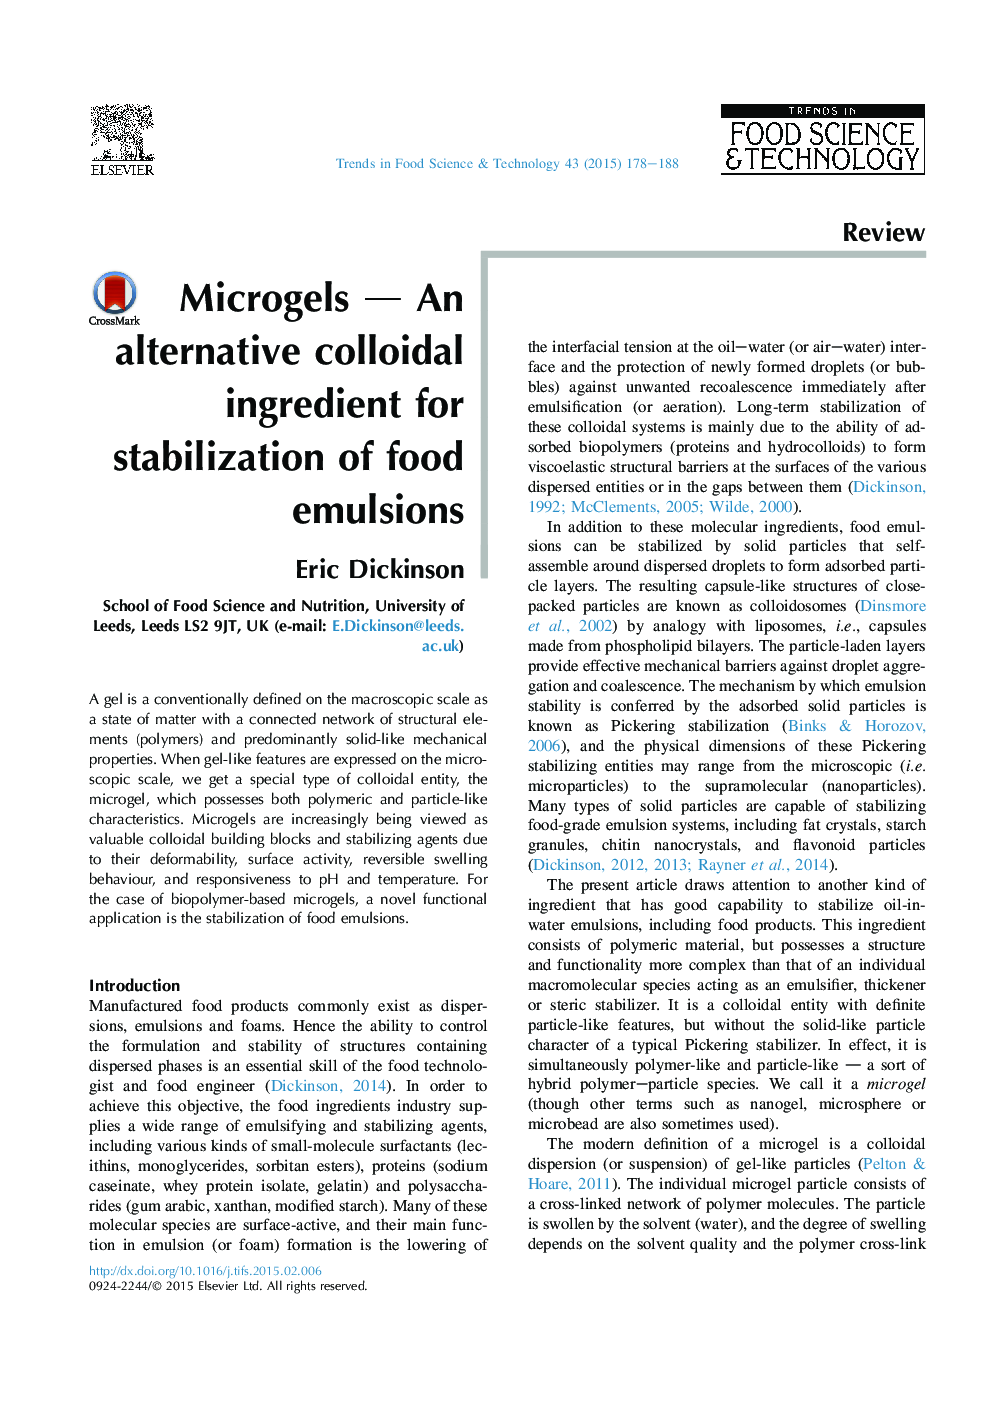 Microgels — An alternative colloidal ingredient for stabilization of food emulsions